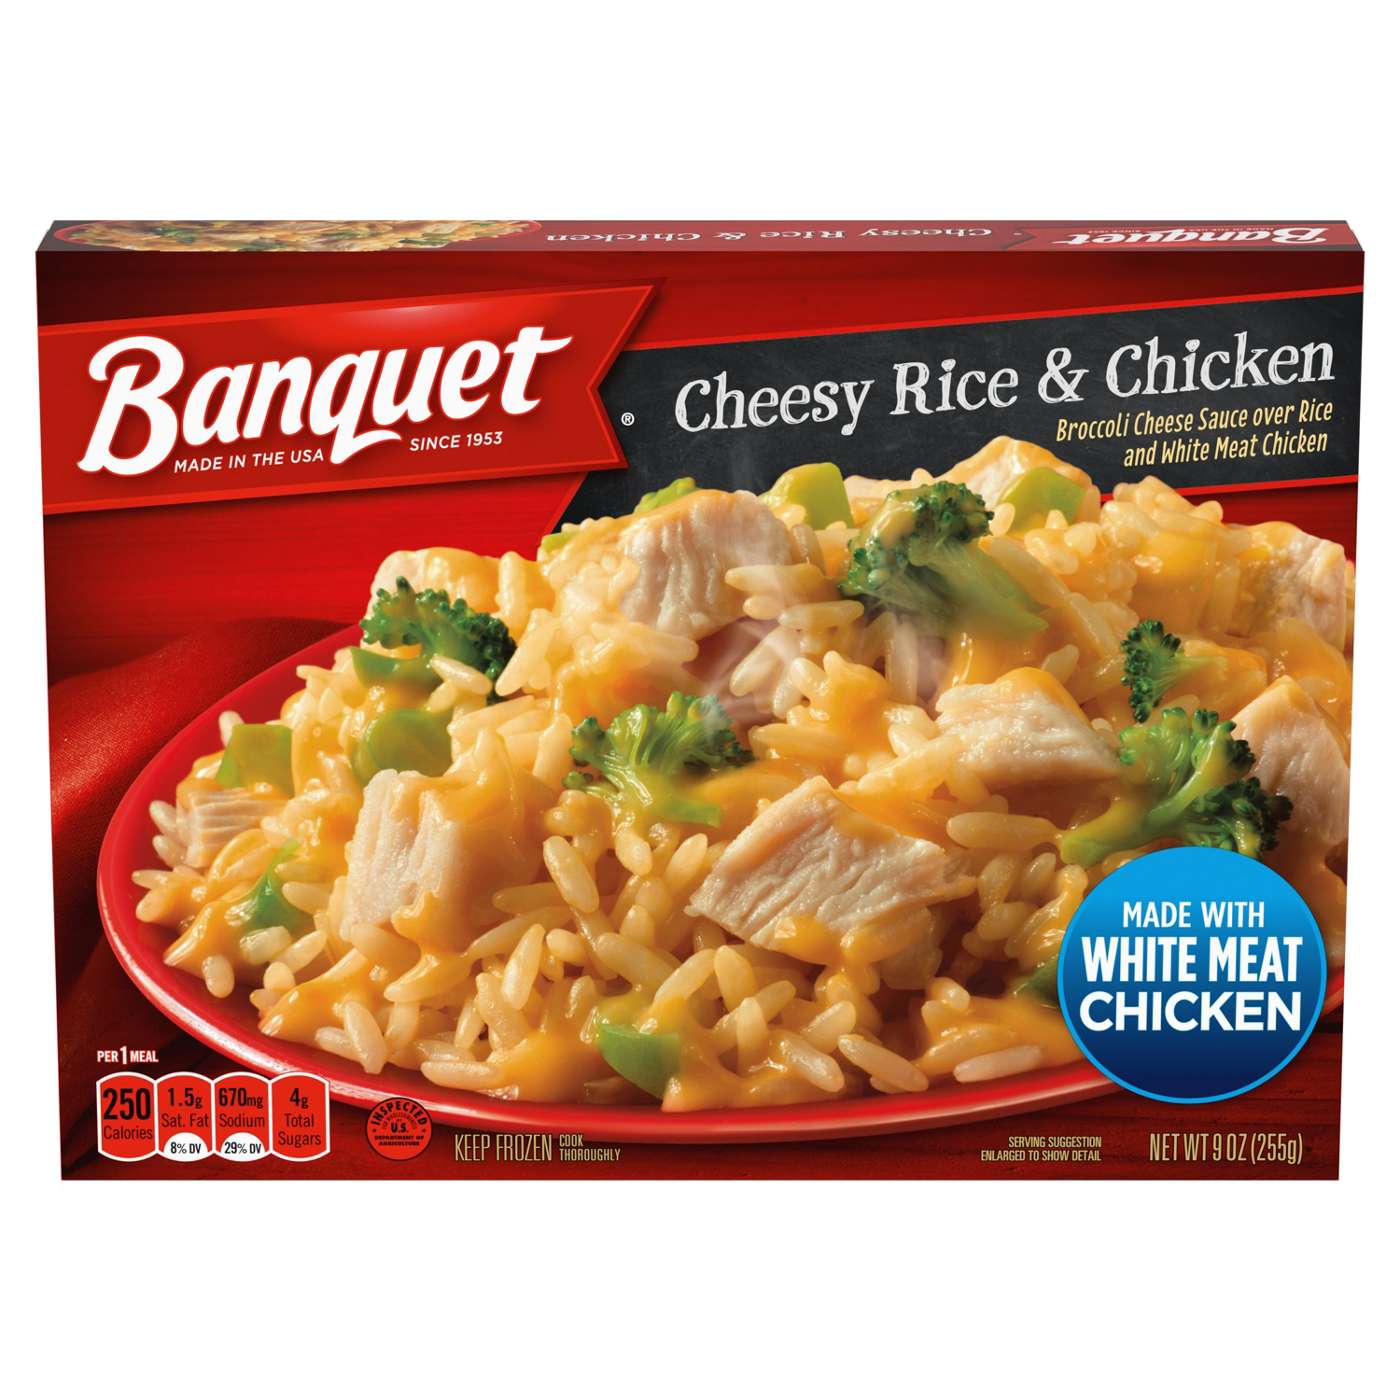 Banquet Cheesy Rice & Chicken Frozen Meal; image 1 of 4